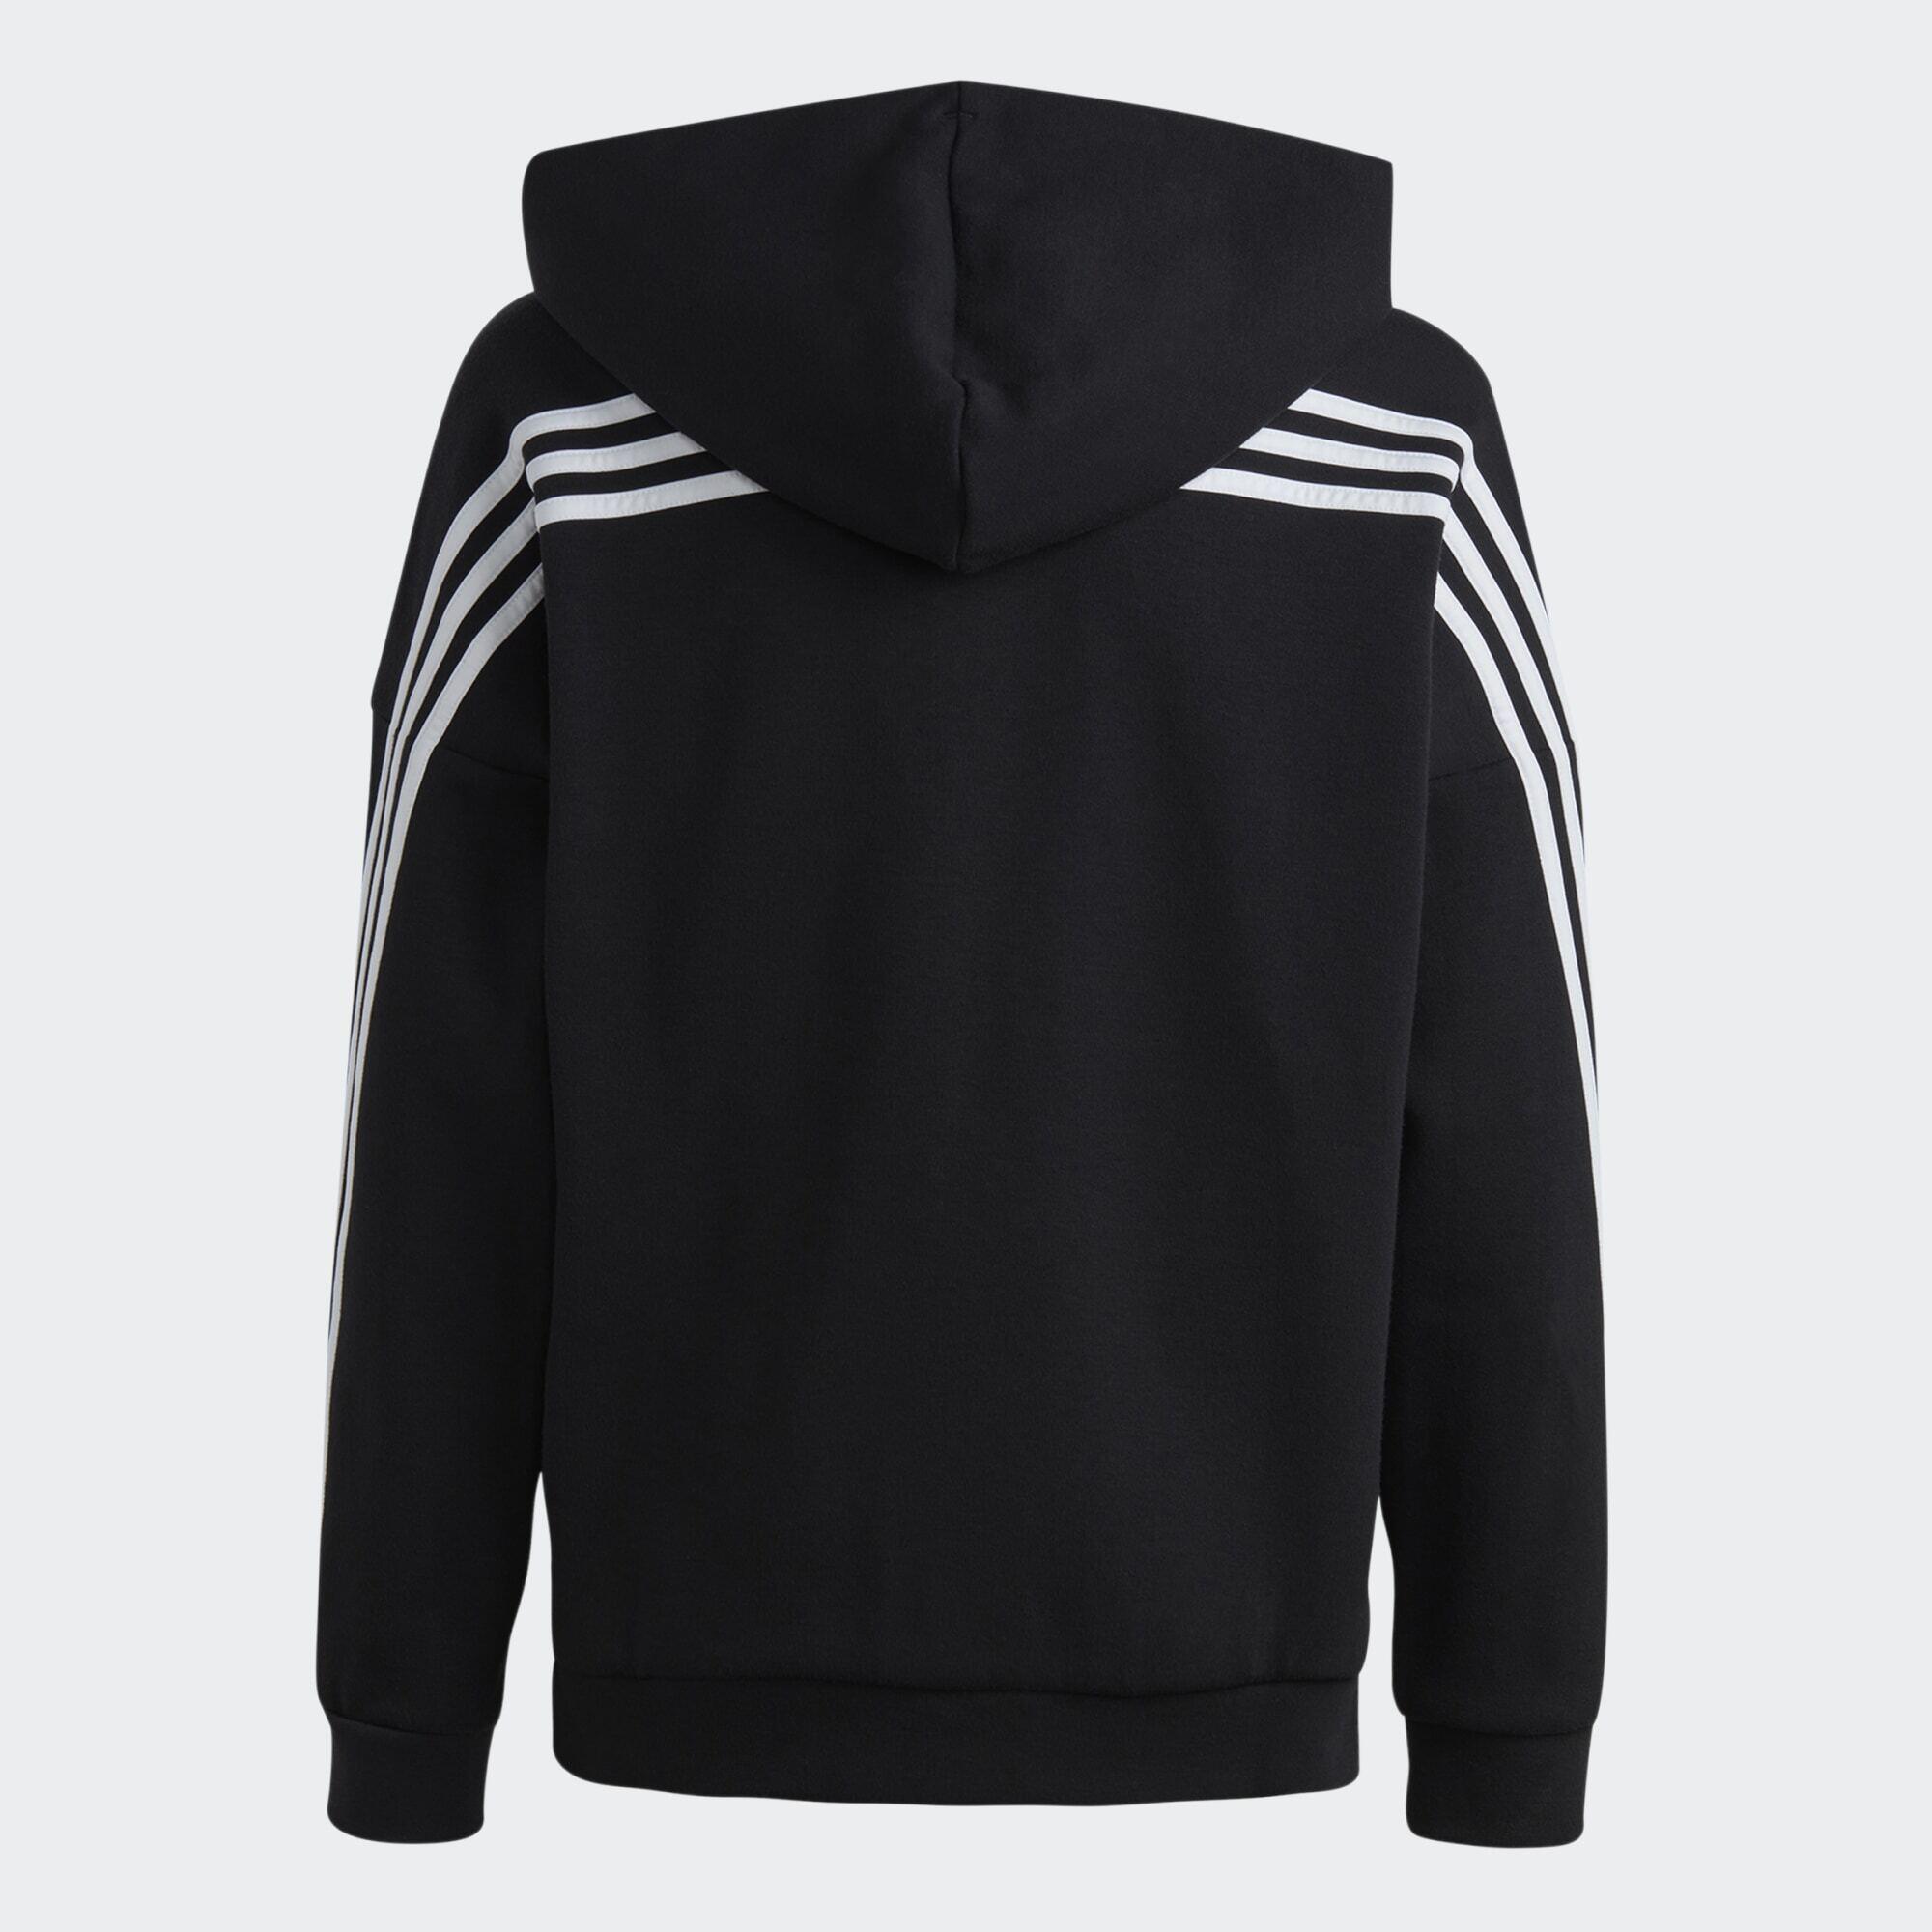 Future Icons 3-Stripes Full-Zip Hooded Track Top 6/7